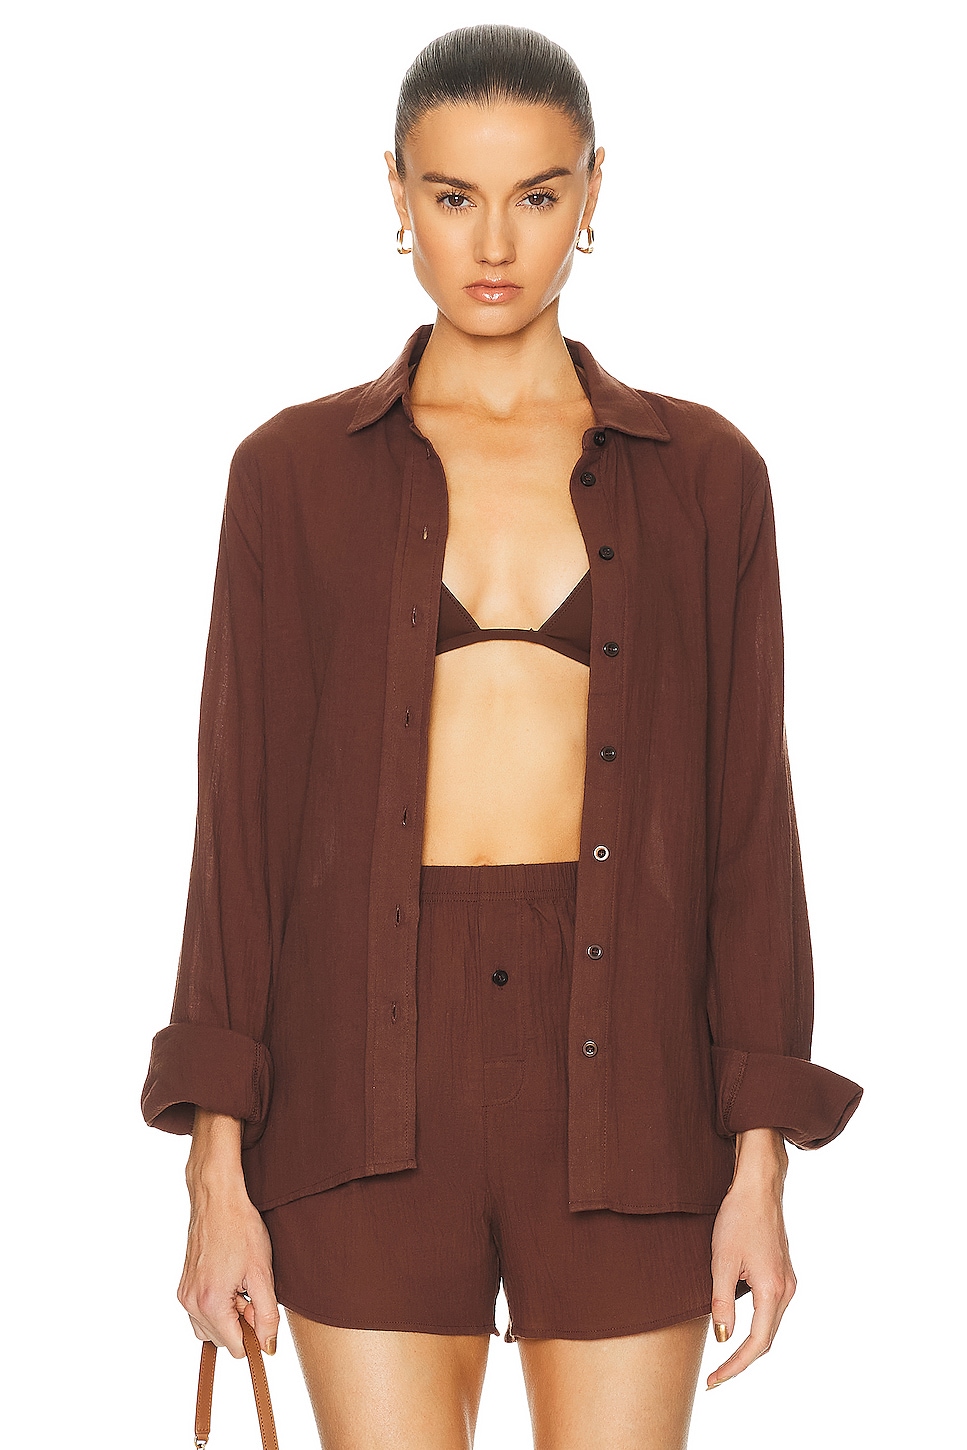 Image 1 of Eterne Jolene Button Down Top in Chocolate